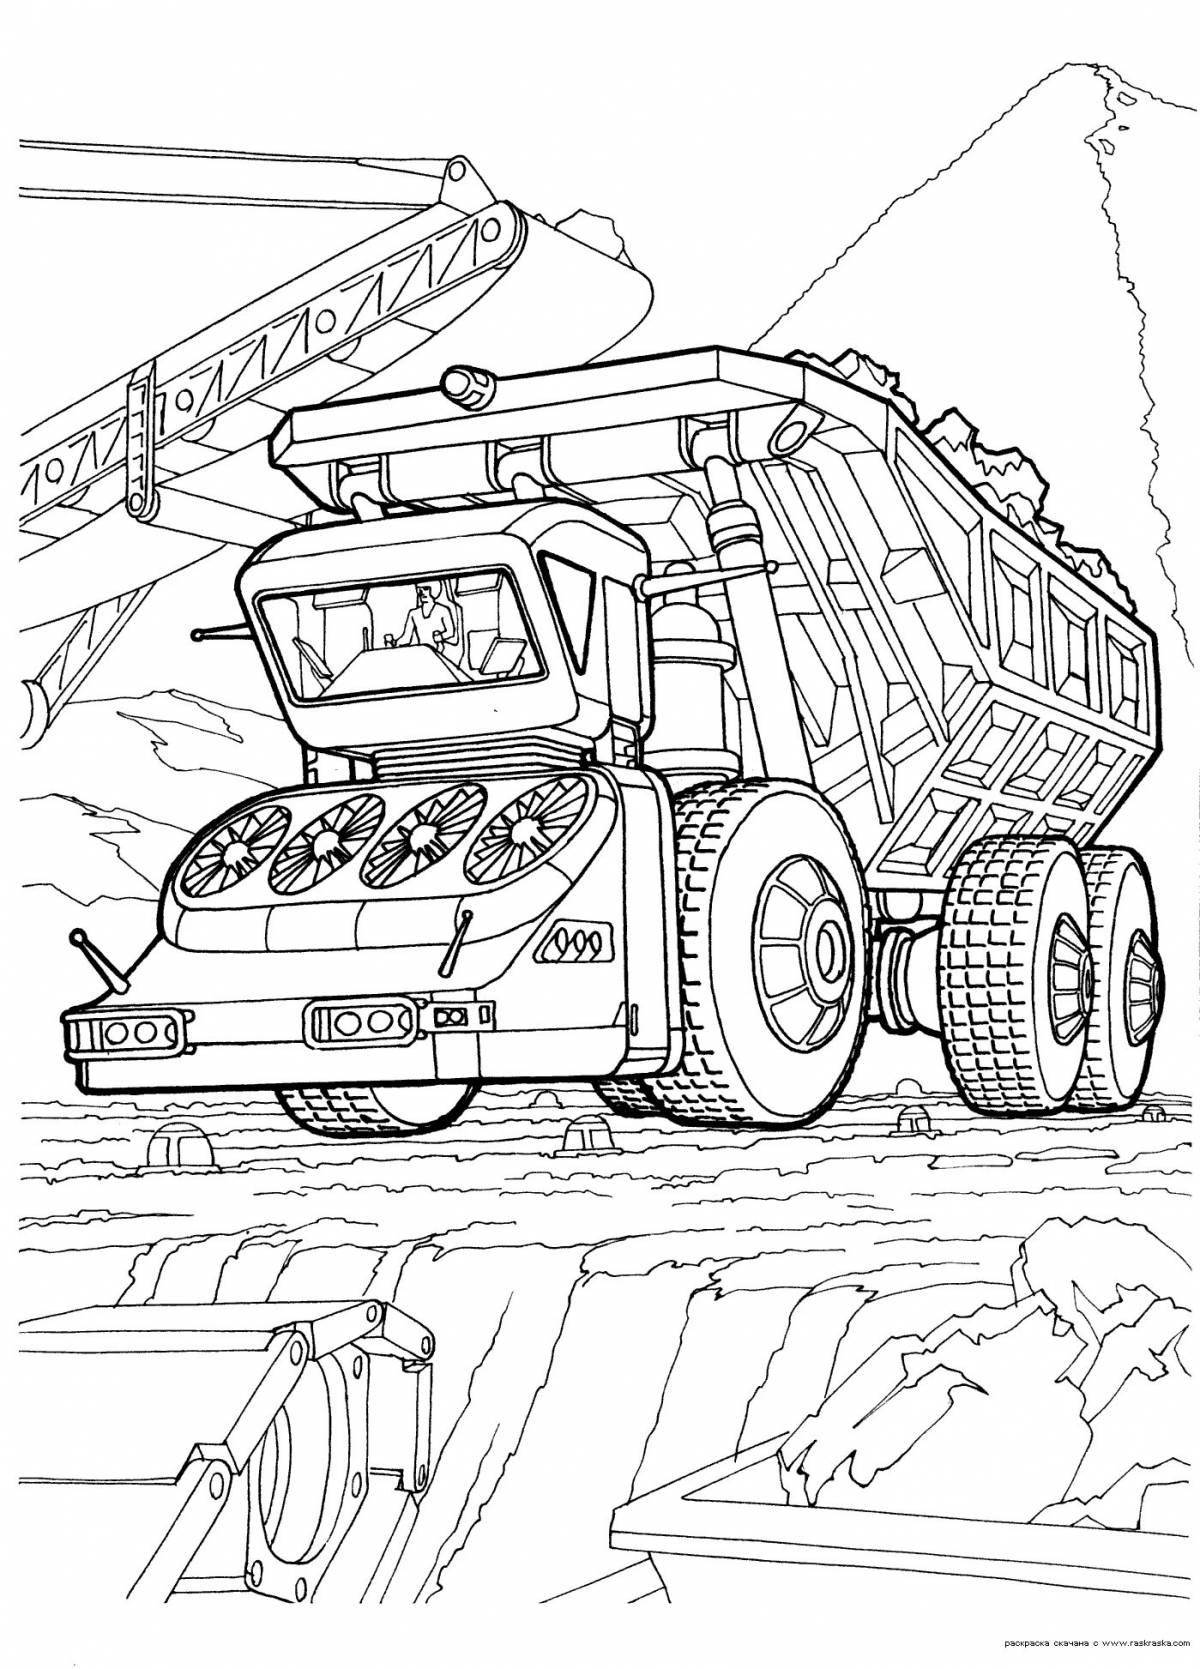 Radiant coloring page complicated cars for boys